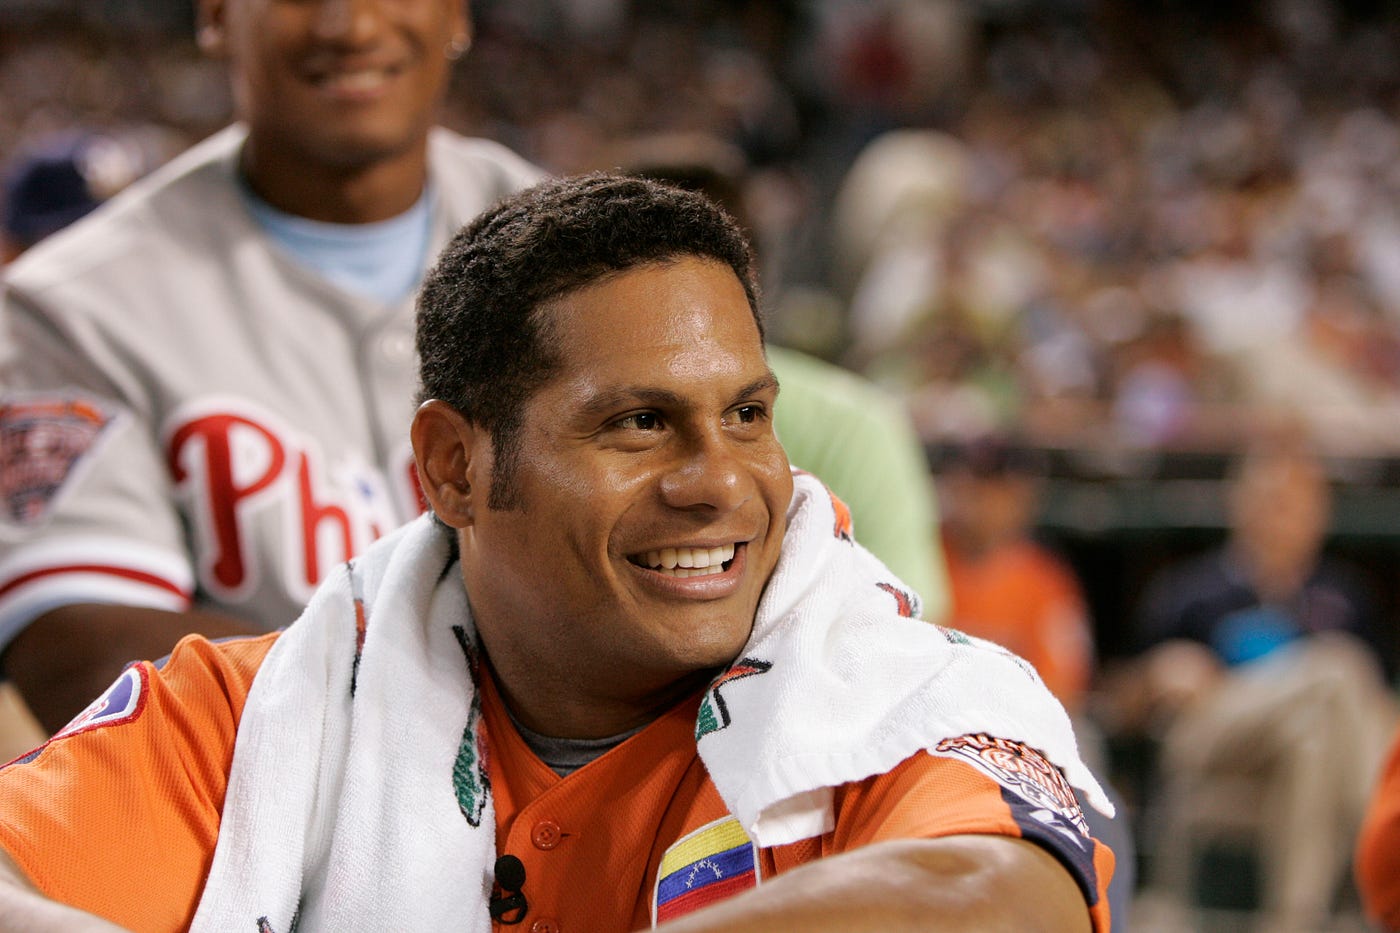 Bobby Abreu sets record at the Home Run Derby 